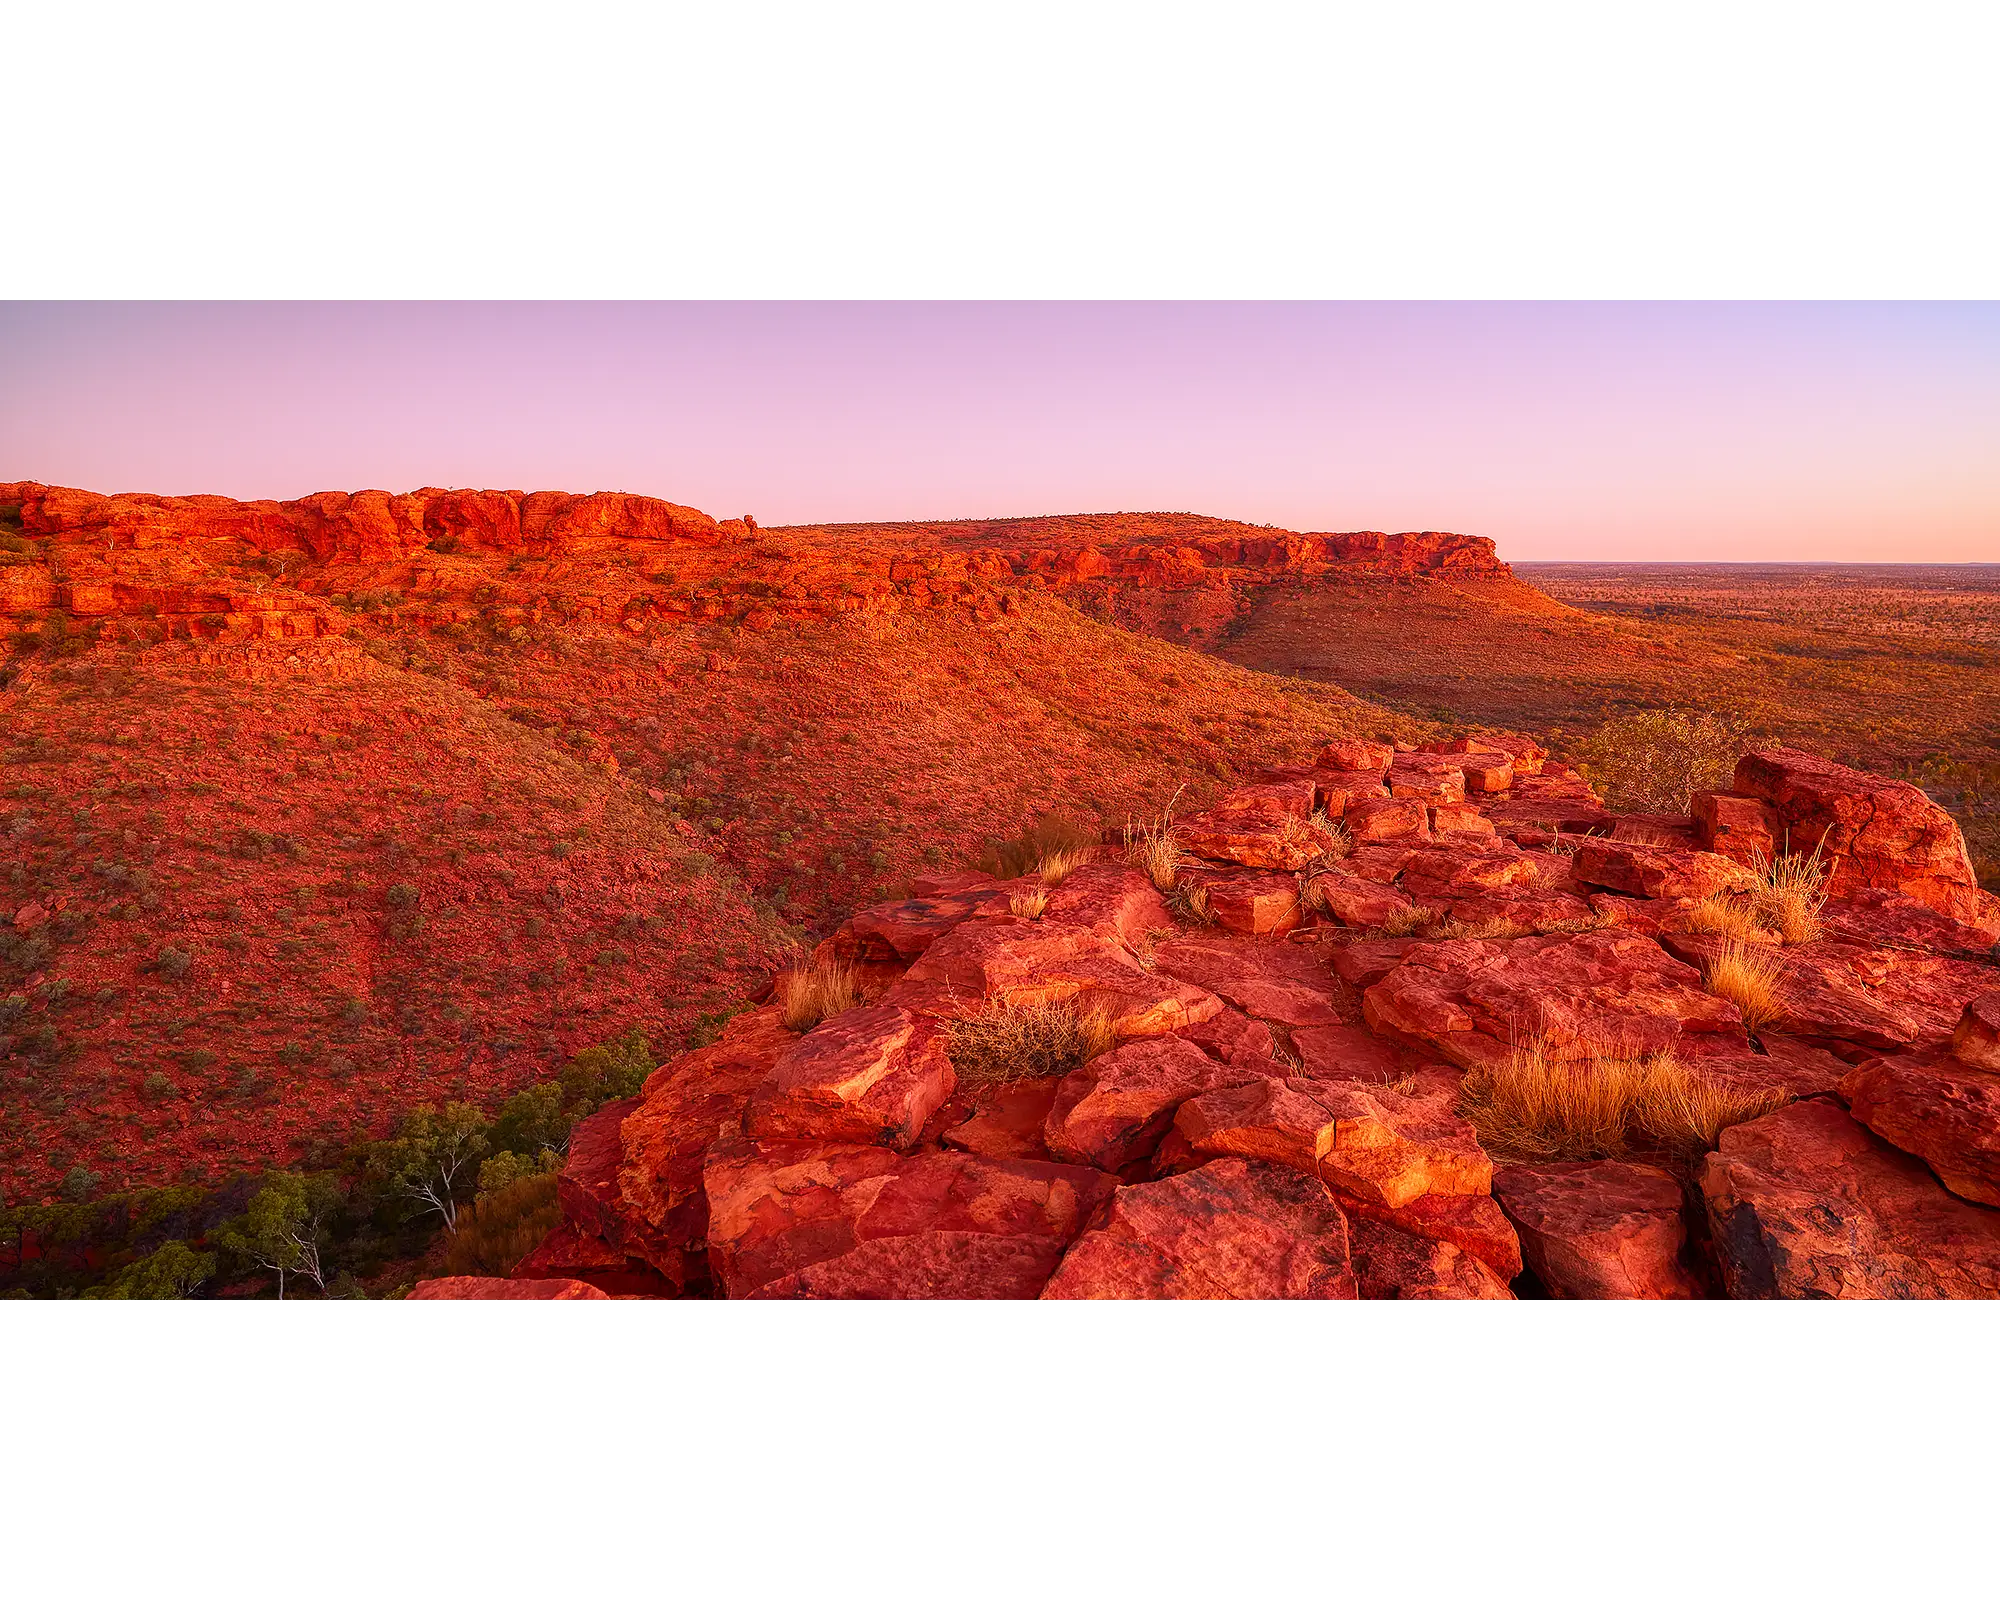 Outback Solitude. Sunset over Kings Canyon, Northern Territory, Australia.